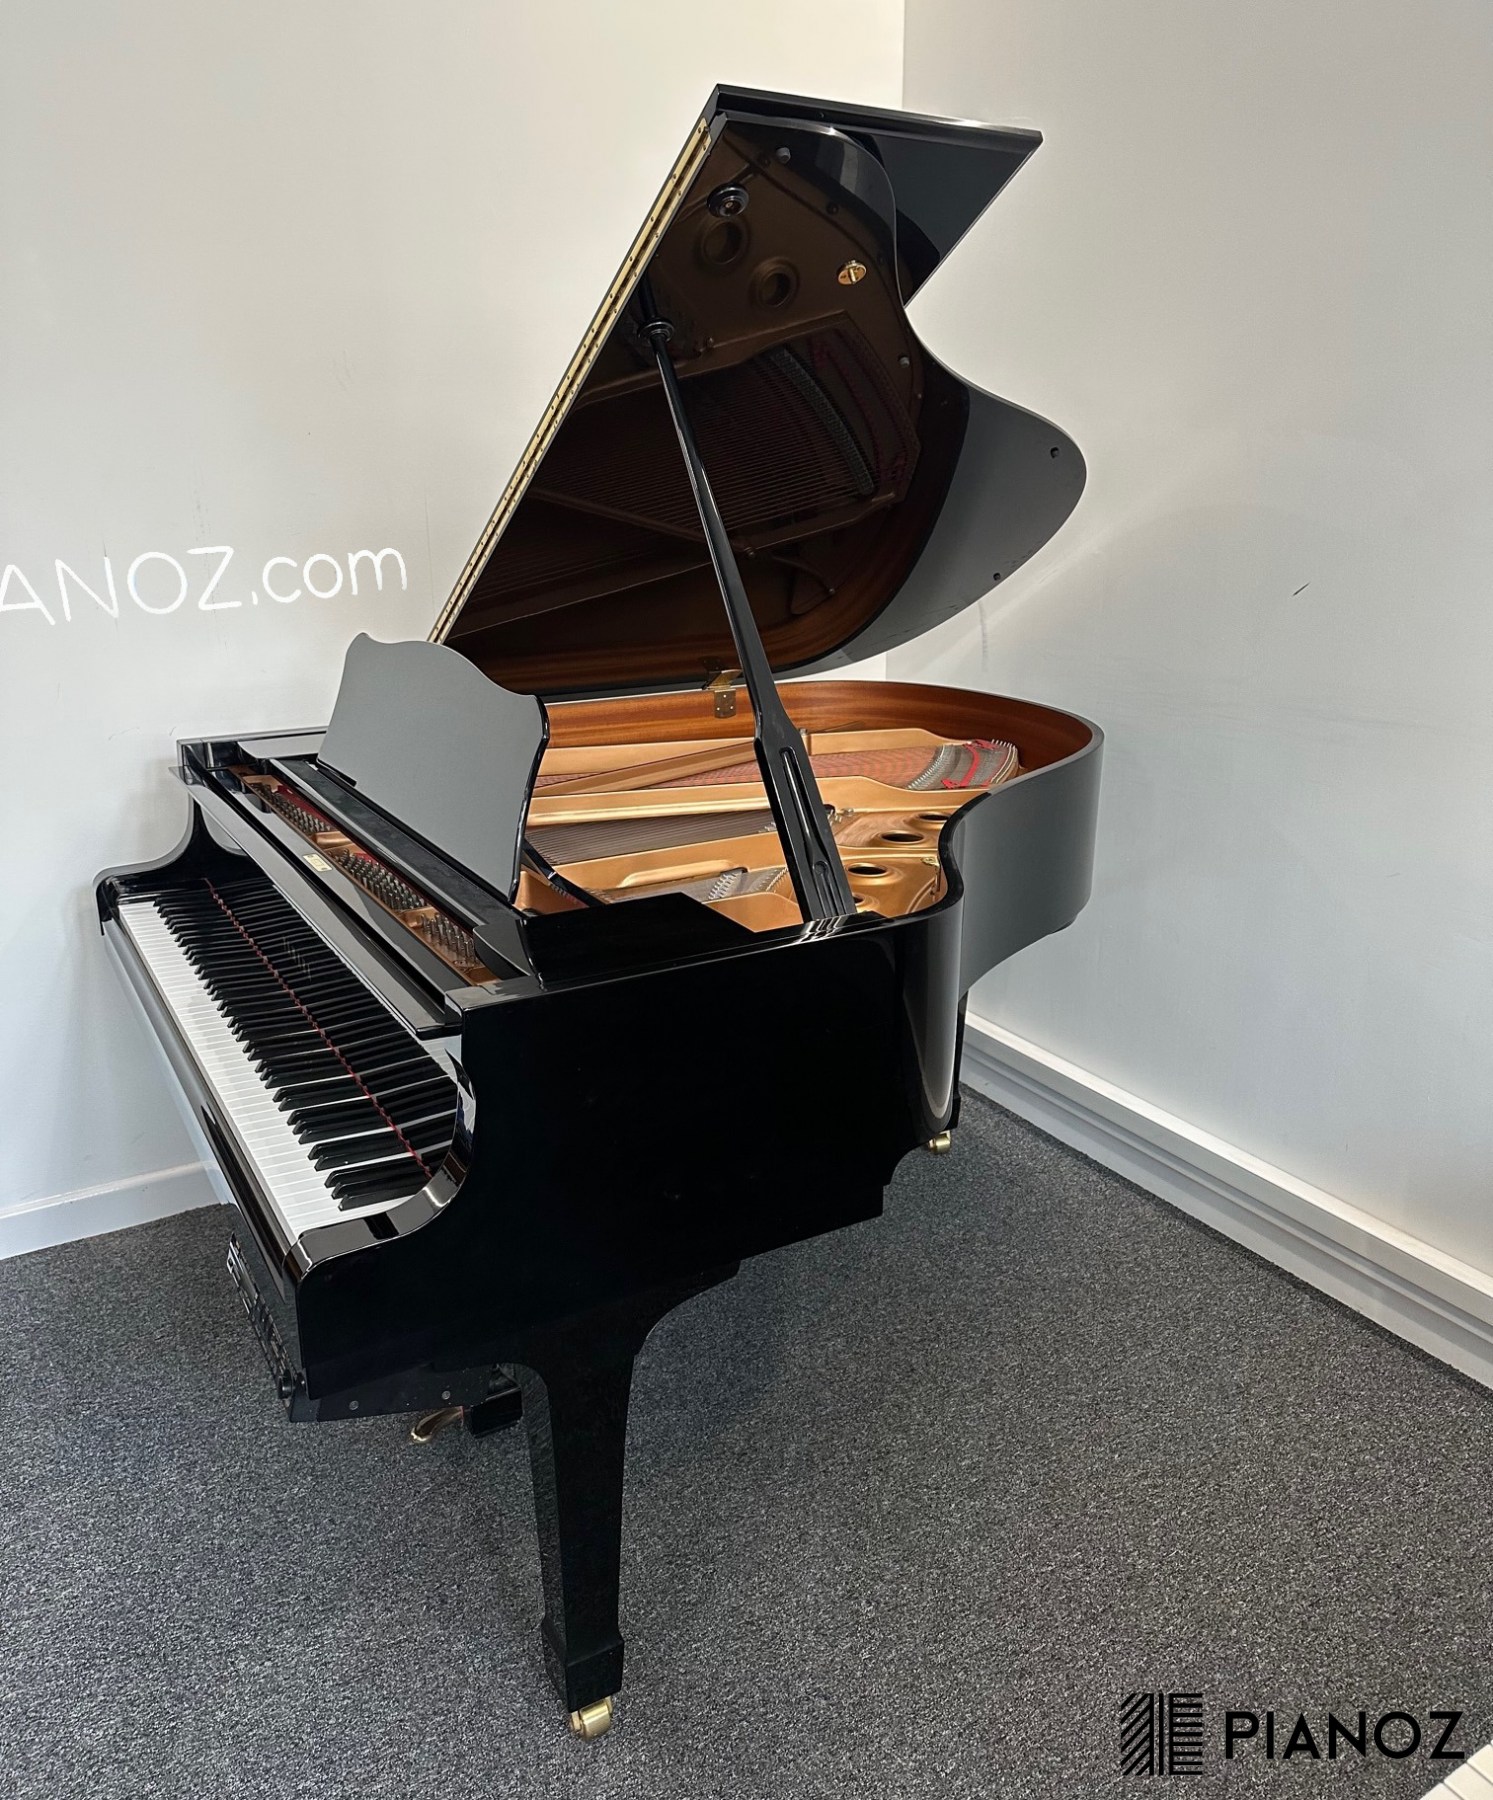 Yamaha C2 Disklavier Self Playing Baby Grand Piano piano for sale in UK